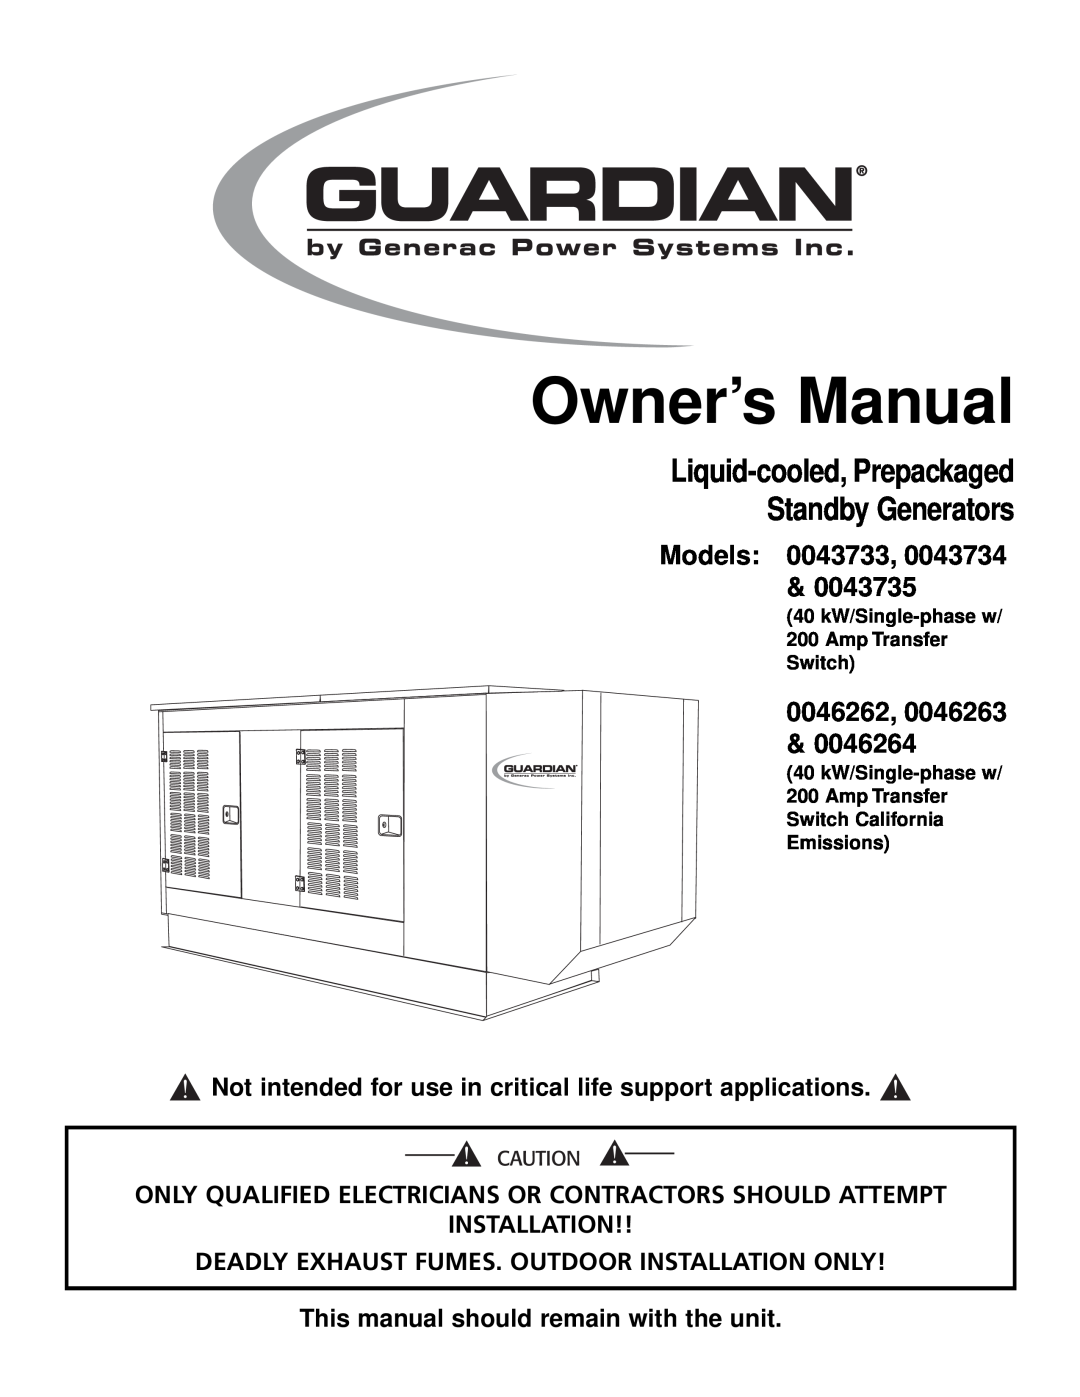 Generac Power Systems 0046264 owner manual Owner’s Manual, Liquid-cooled,Prepackaged Standby Generators, 0046262, 0046263 